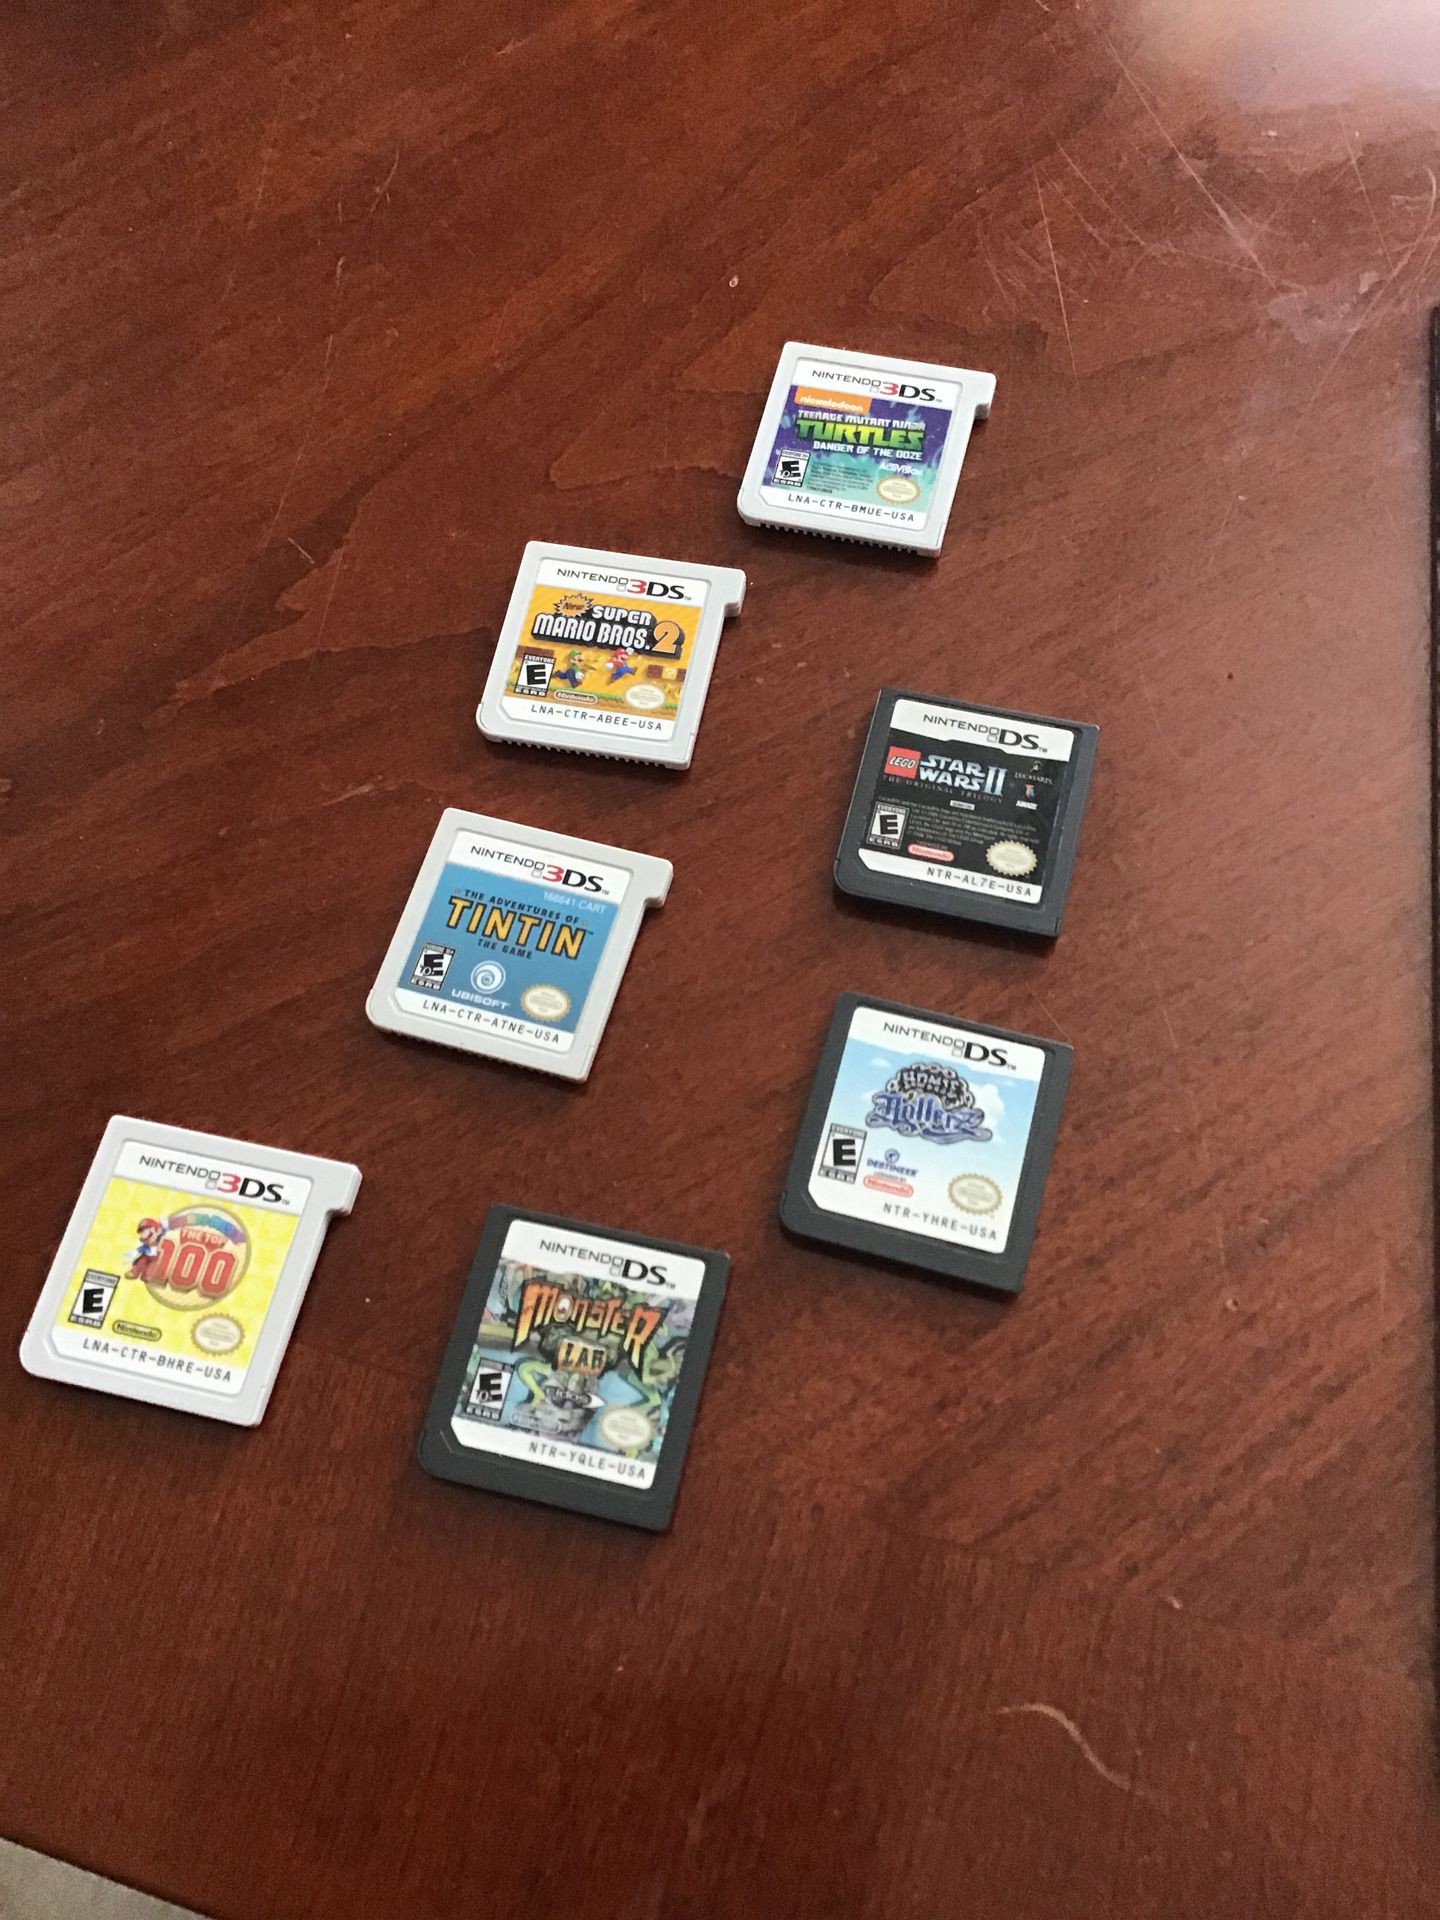 Nintendo DS And 3DS Games